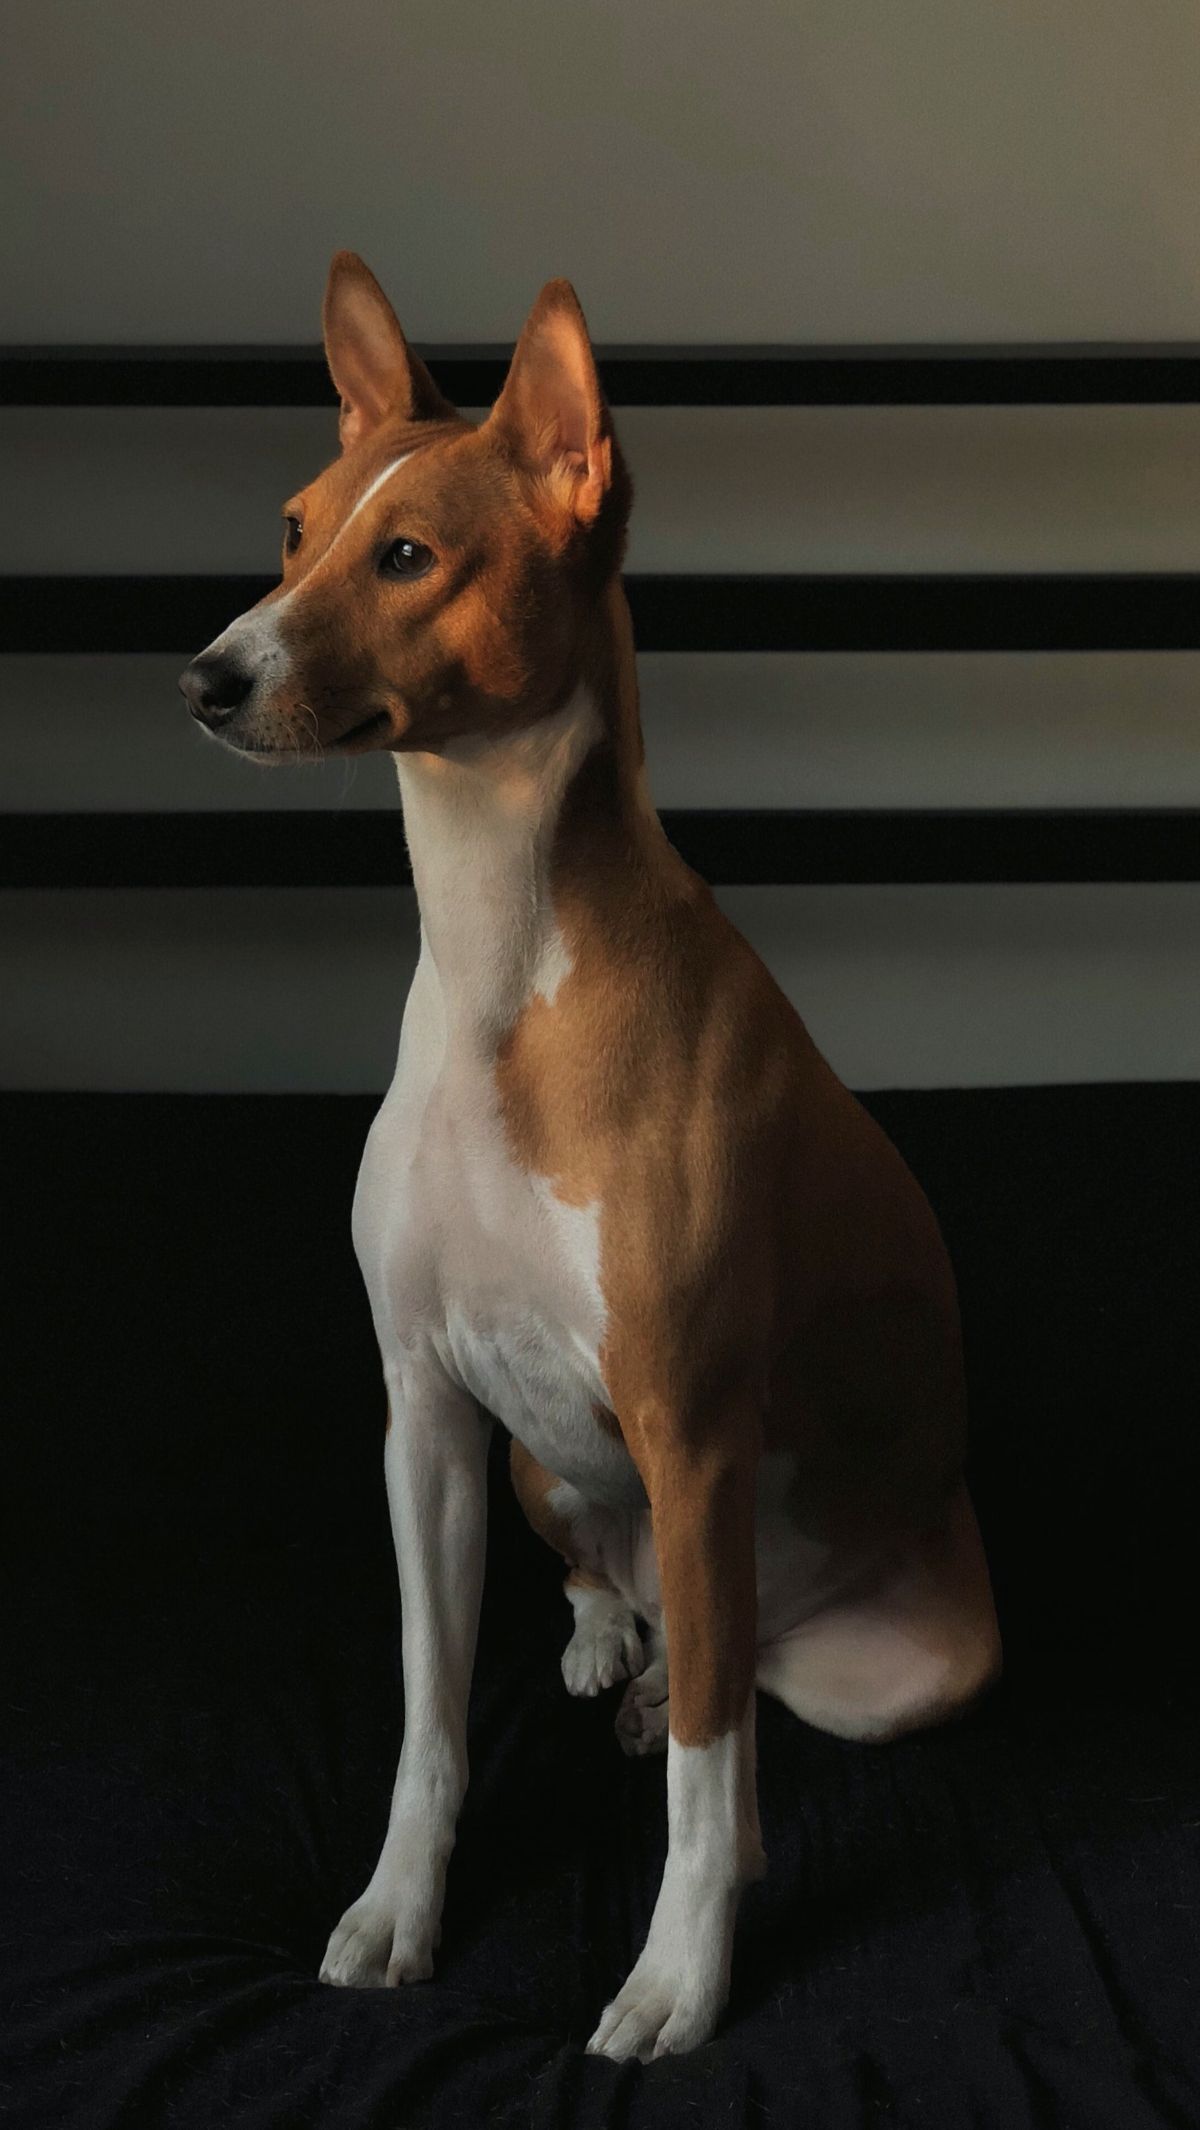 Get to know the 5 Fun Facts about Basenji, the Dog That Doesn’t Bark